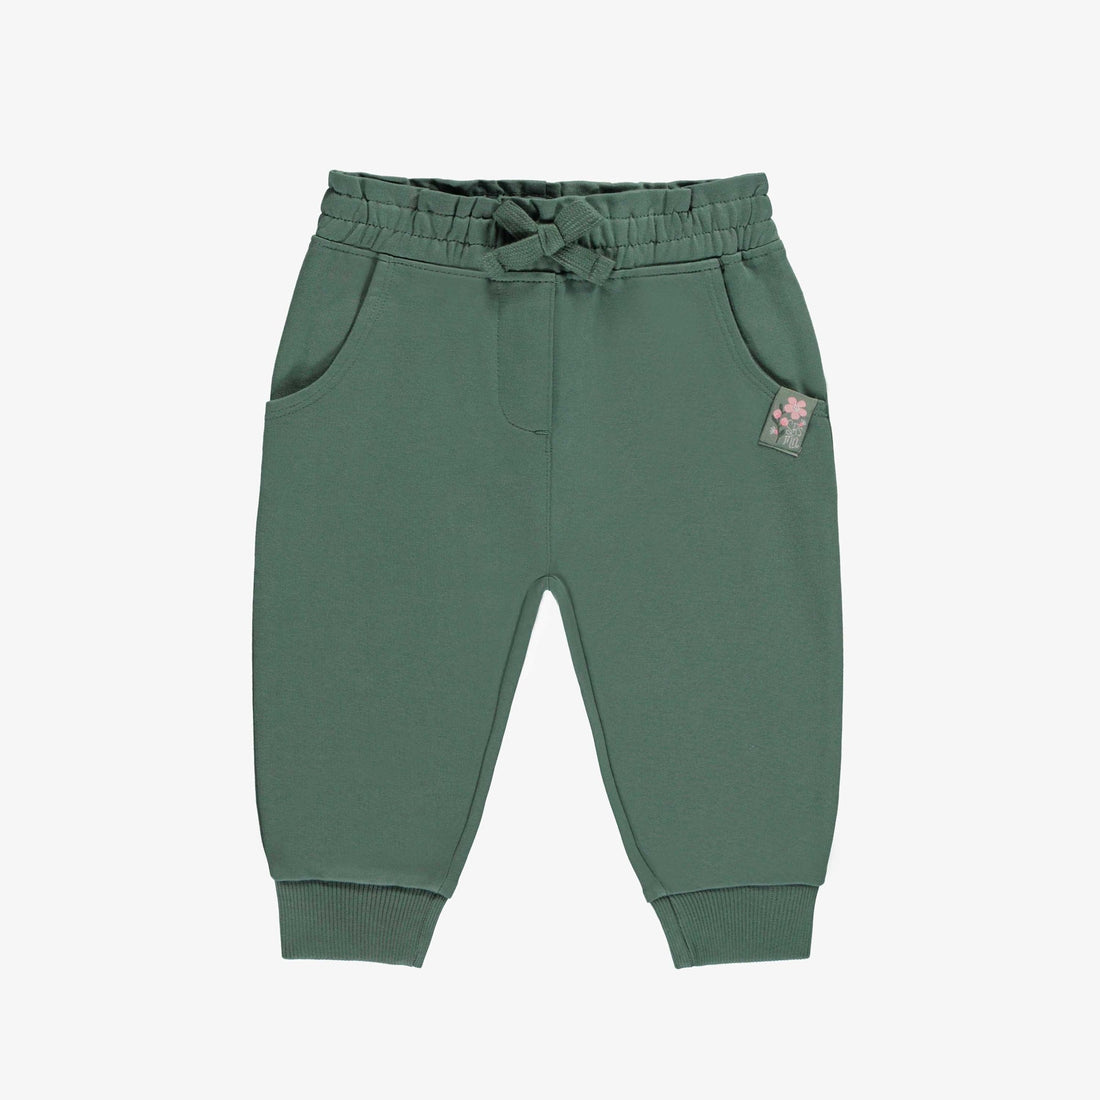 GREEN REGULAR FIT PANTS IN FRENCH TERRY, BABY